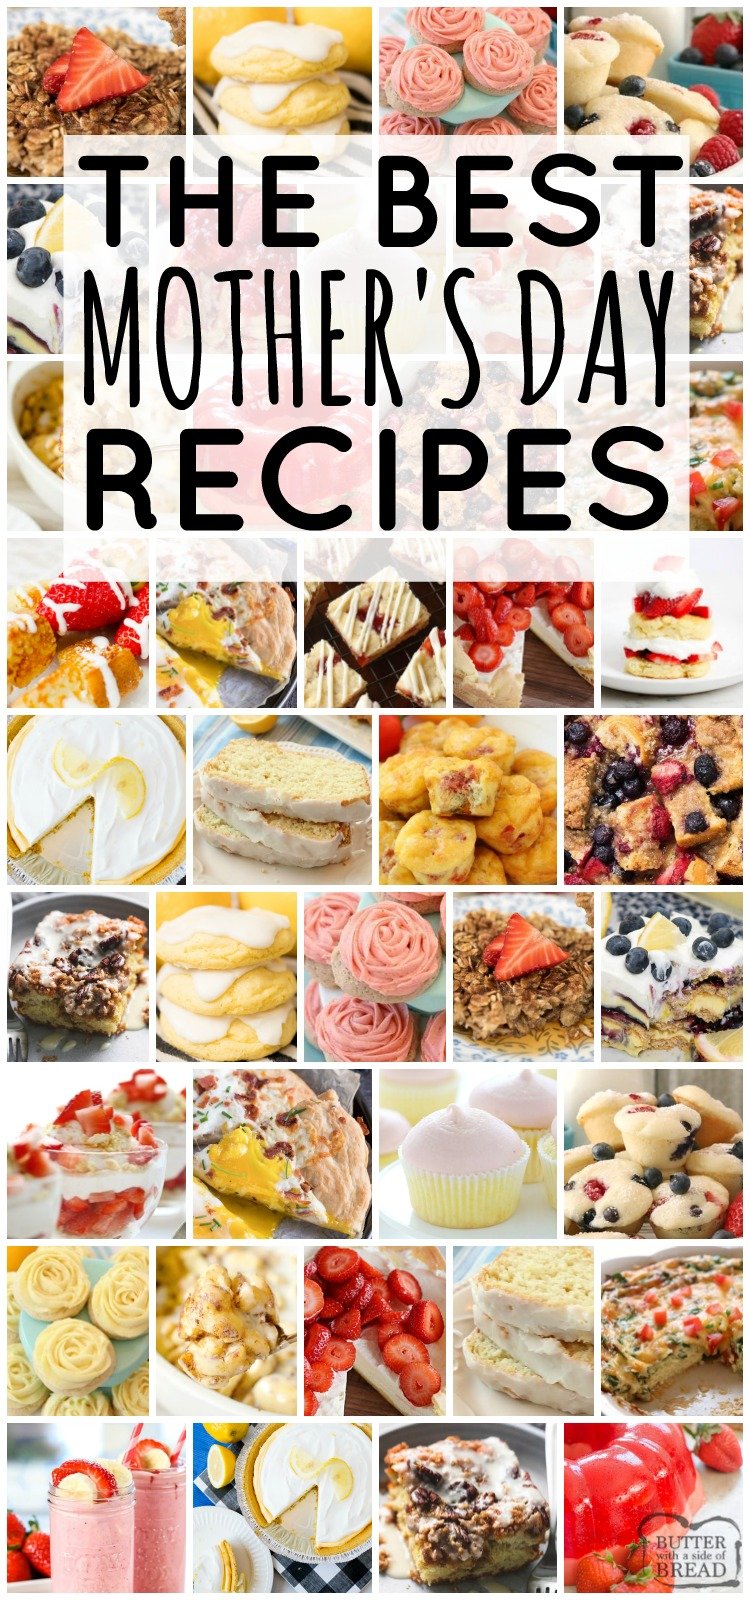 Mother's Day recipes perfect for brunch! Everything from spinach quiche to lemon ice box pie- tons of recipes with fresh berries and lemon. Easy to make, crowd pleasing recipes for Mother's Day. #recipes #mothersday #brunch #lemon #strawberry #food from BUTTER WITH A SIDE OF BREAD